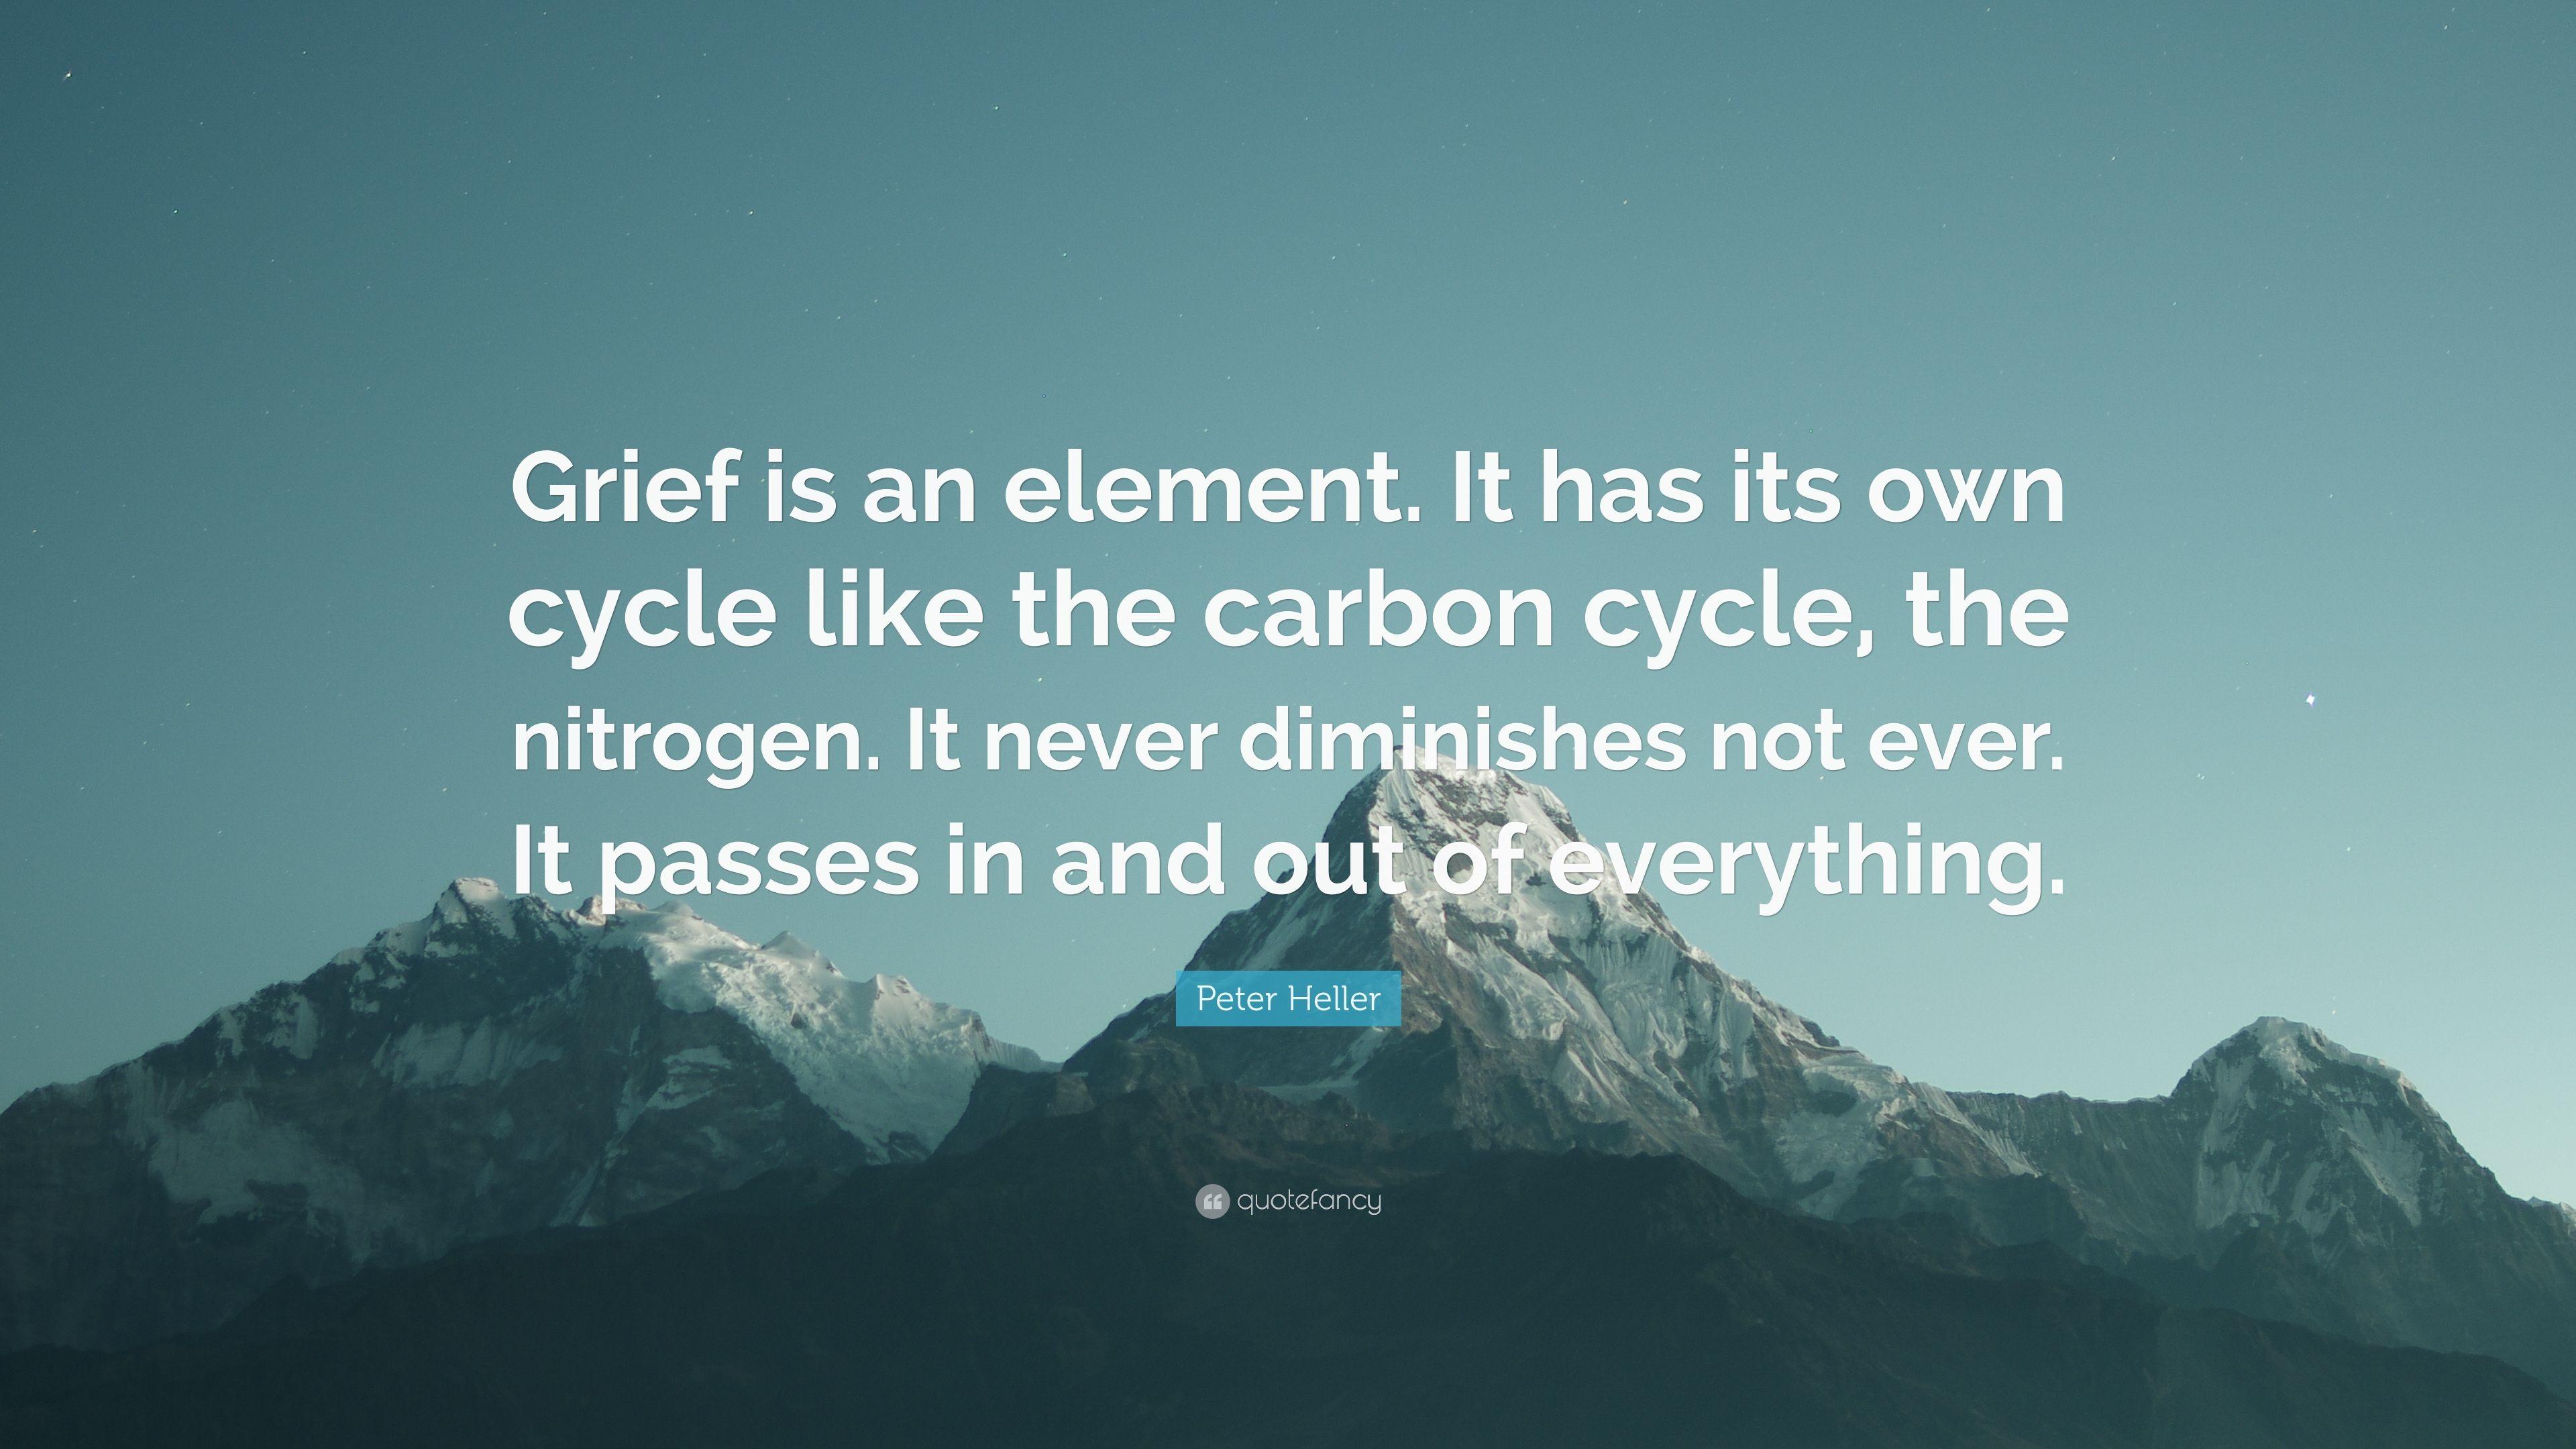 Peter Heller Quote: “Grief is an element. It has its own cycle